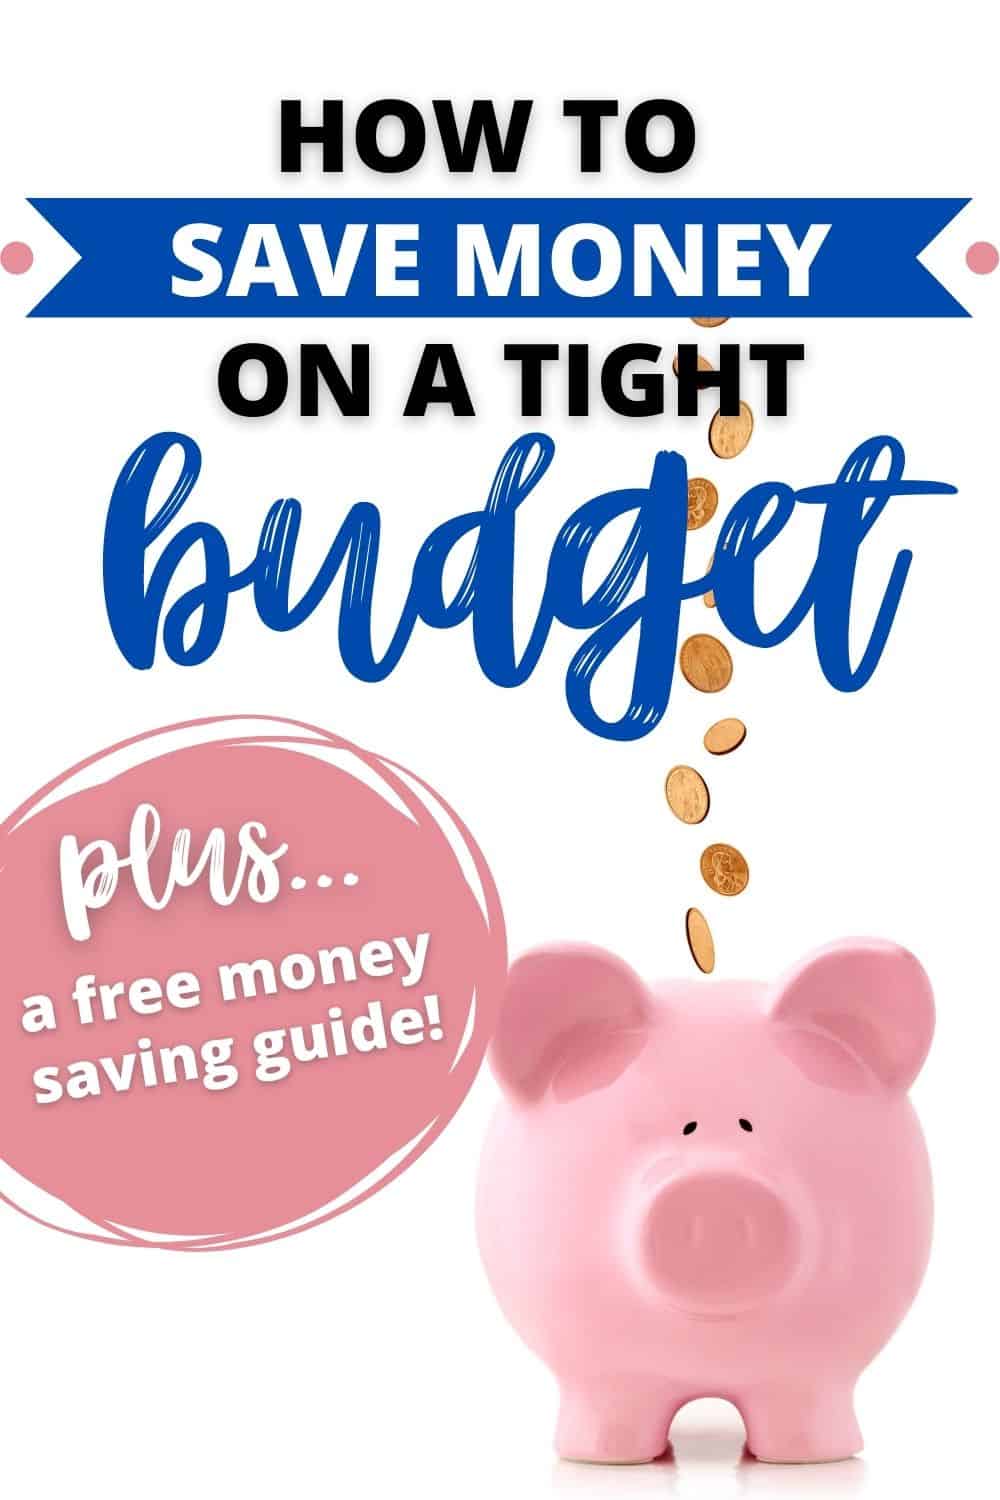 How to save money on a tight budget